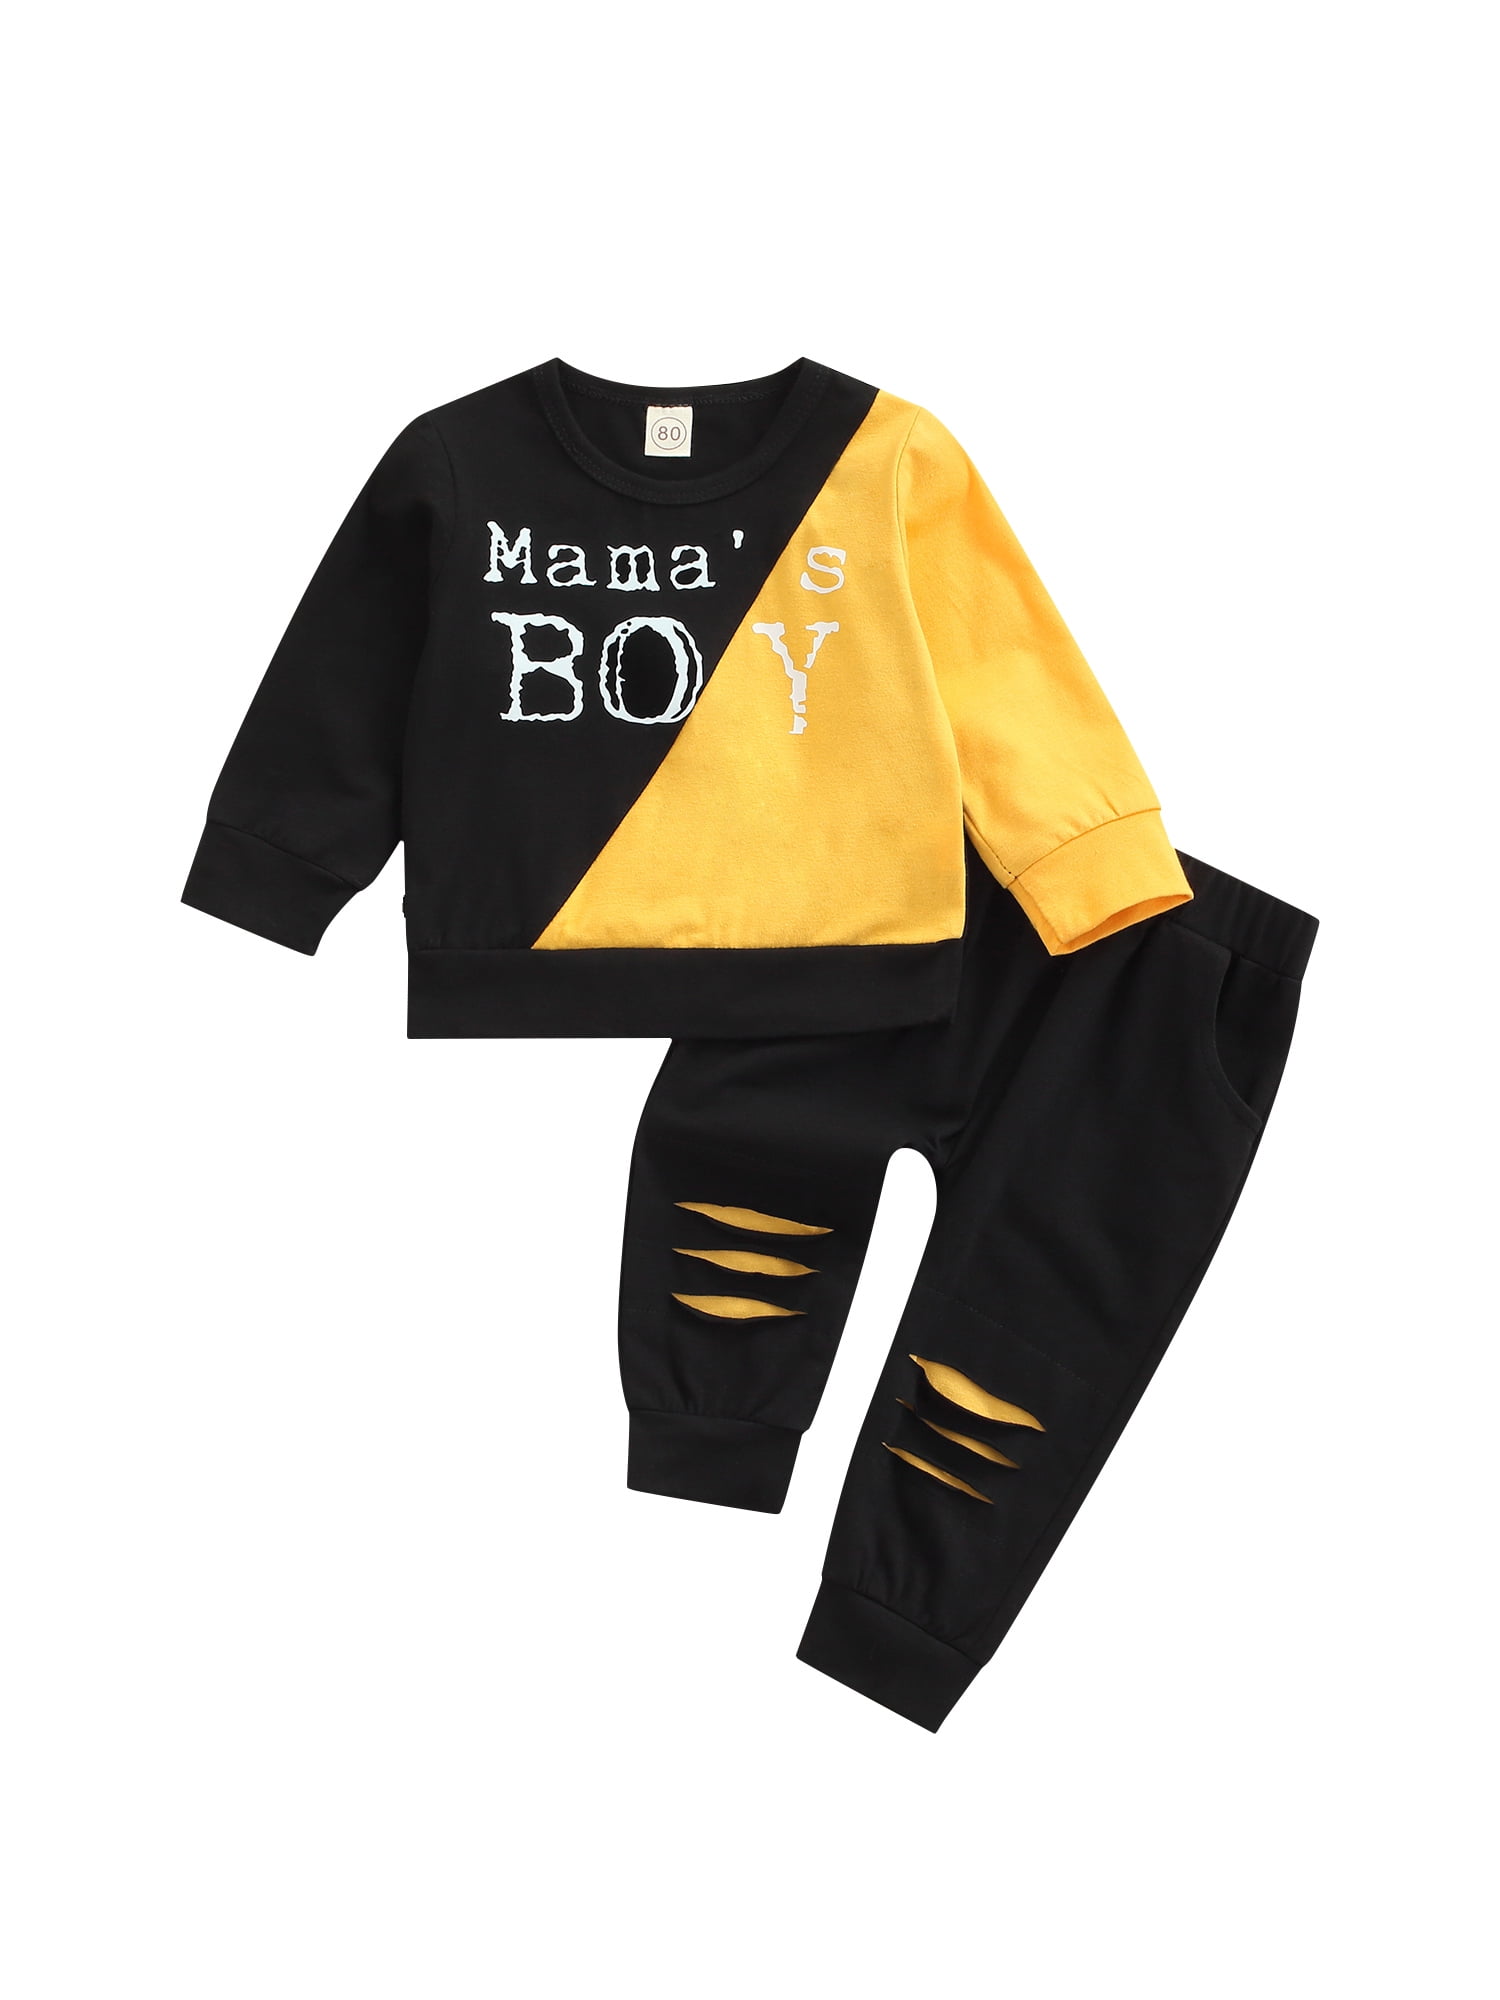 Toddler Baby Boy Letters Printed Tops Pants Leggings Outfits Clothes Set